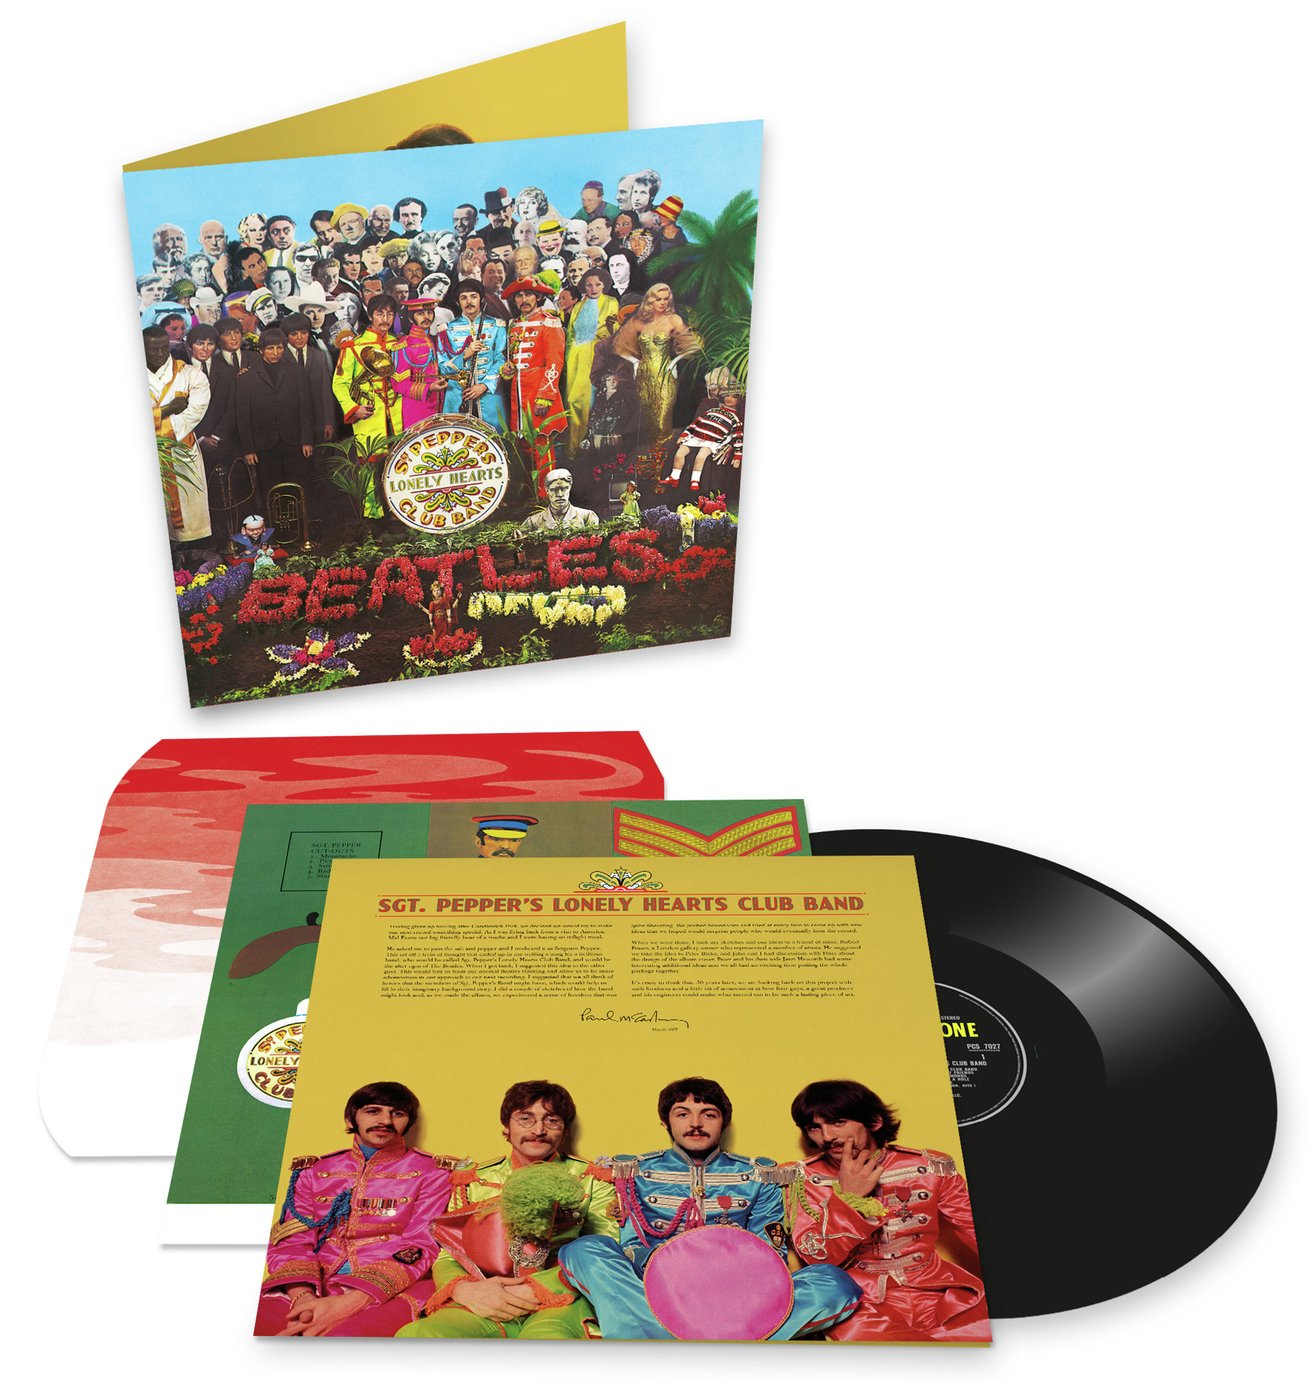 The Beatles Sergeant Pepper's Lonely Hearts Club Band Vinyl Review